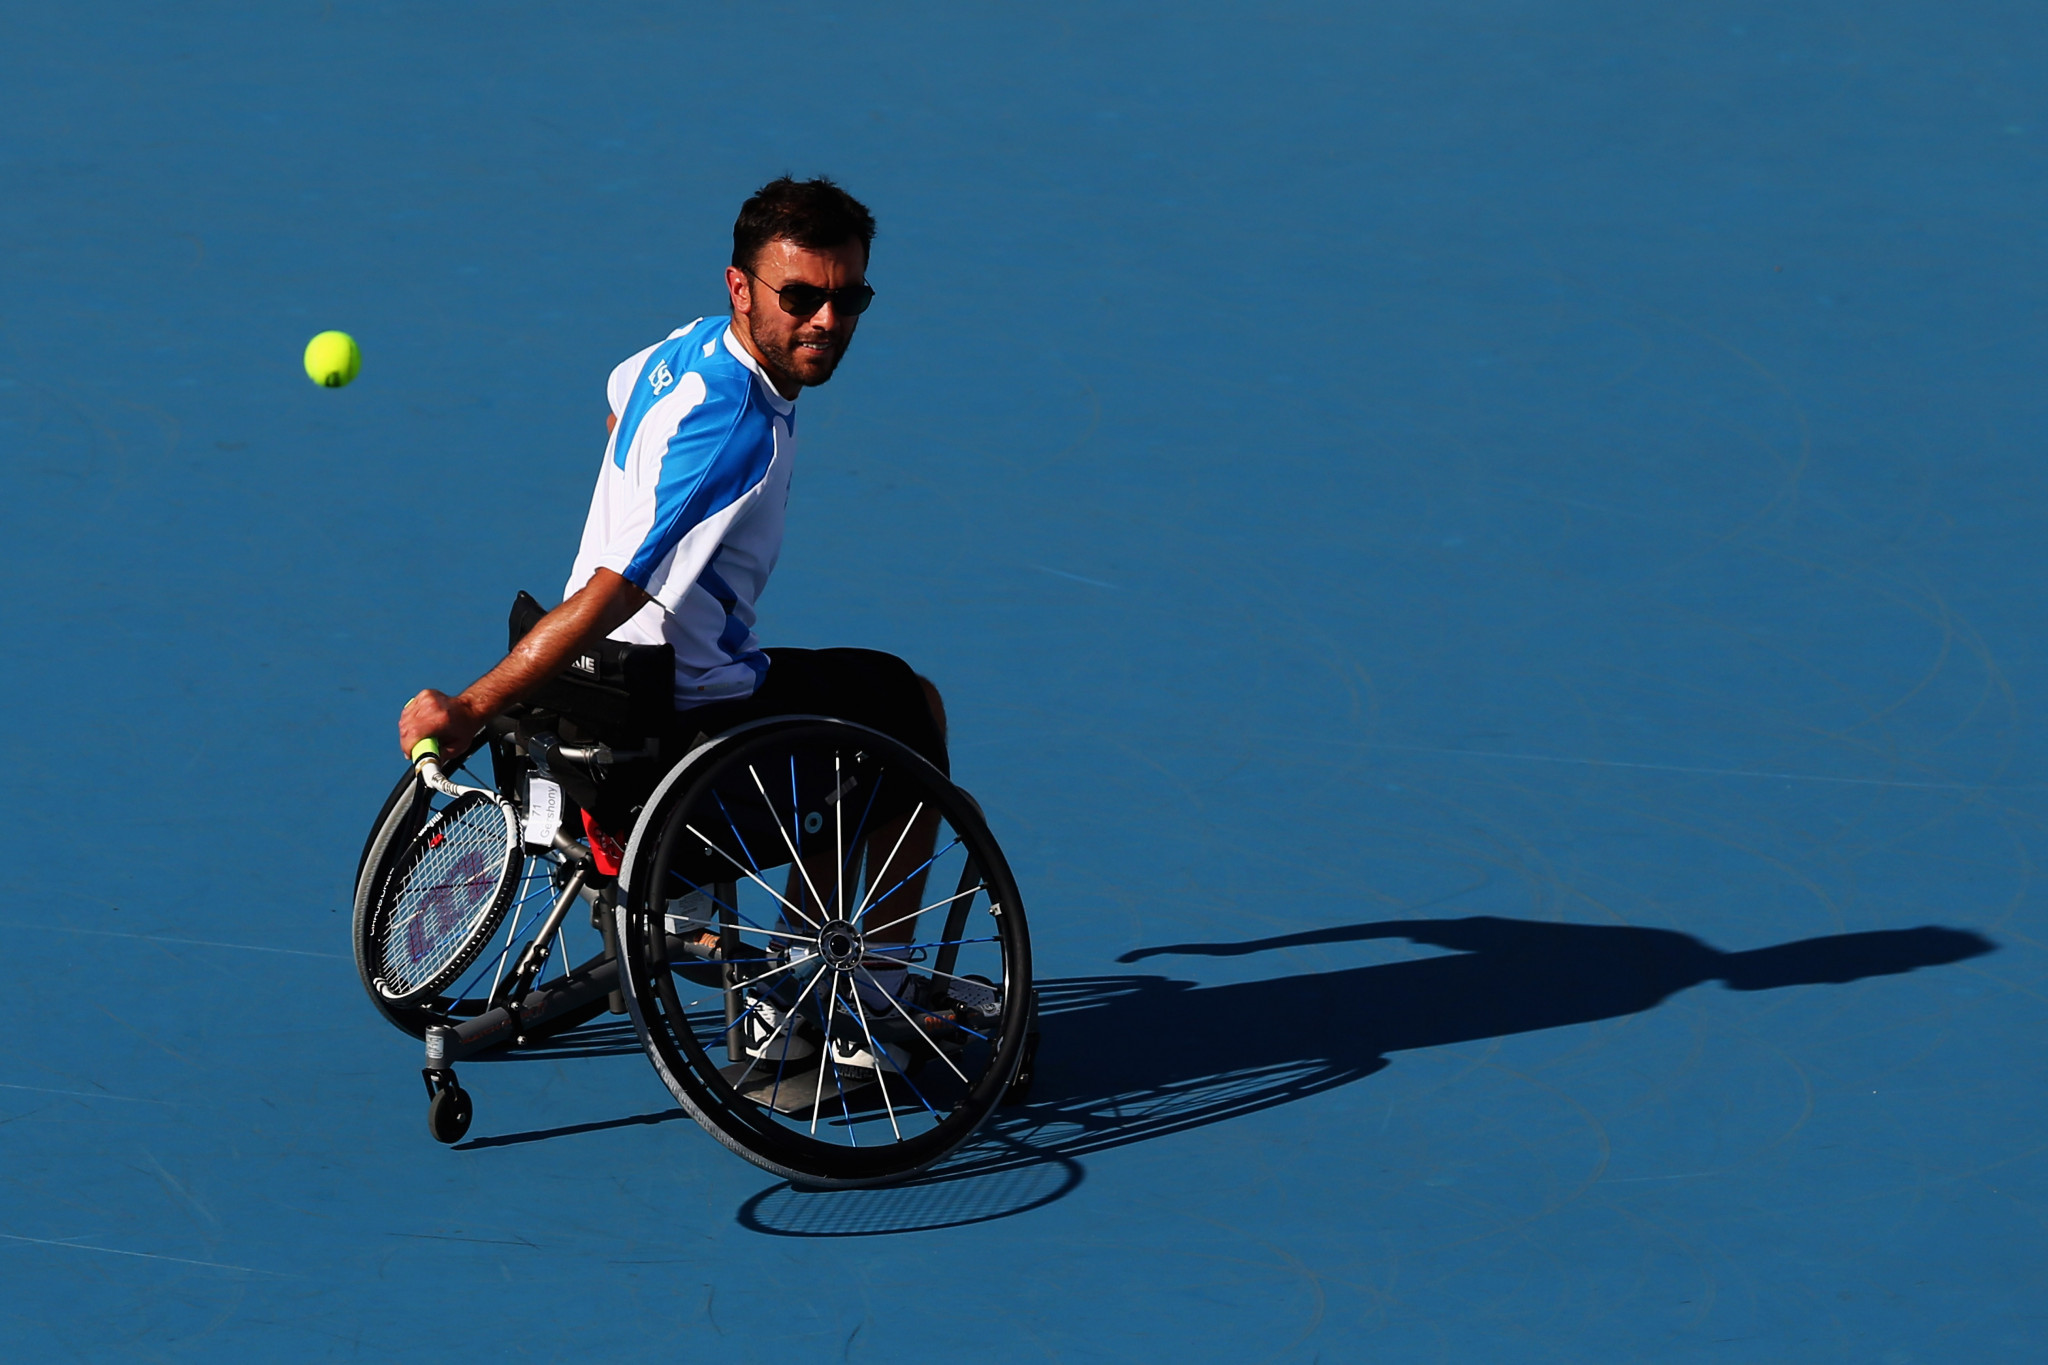 Noam Gershony helped hosts Israel to a 2-1 victory against the US in Group One of the quad event ©Getty Images